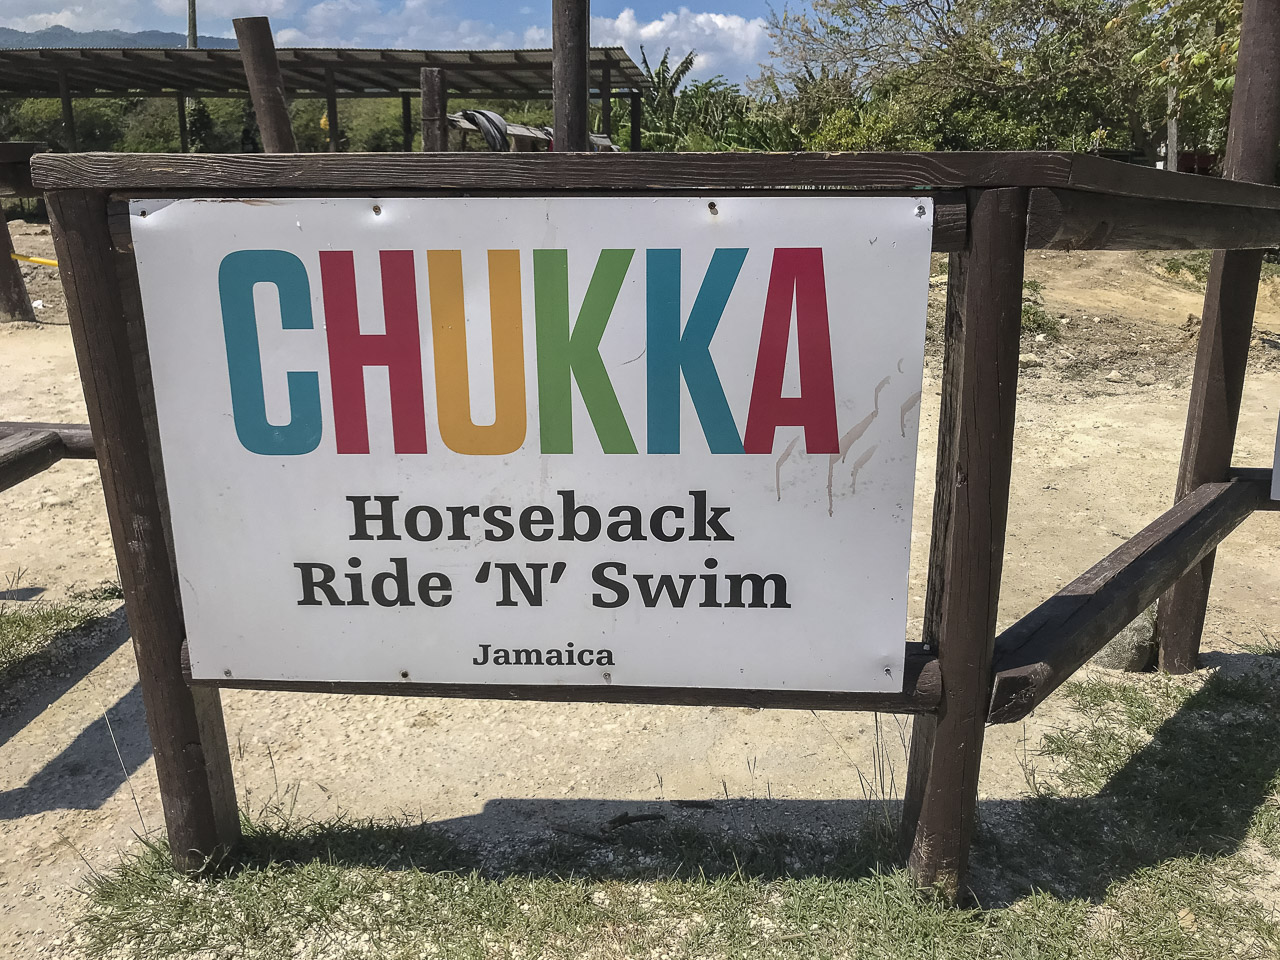 Swimming with horses in Jamaica with Chukka